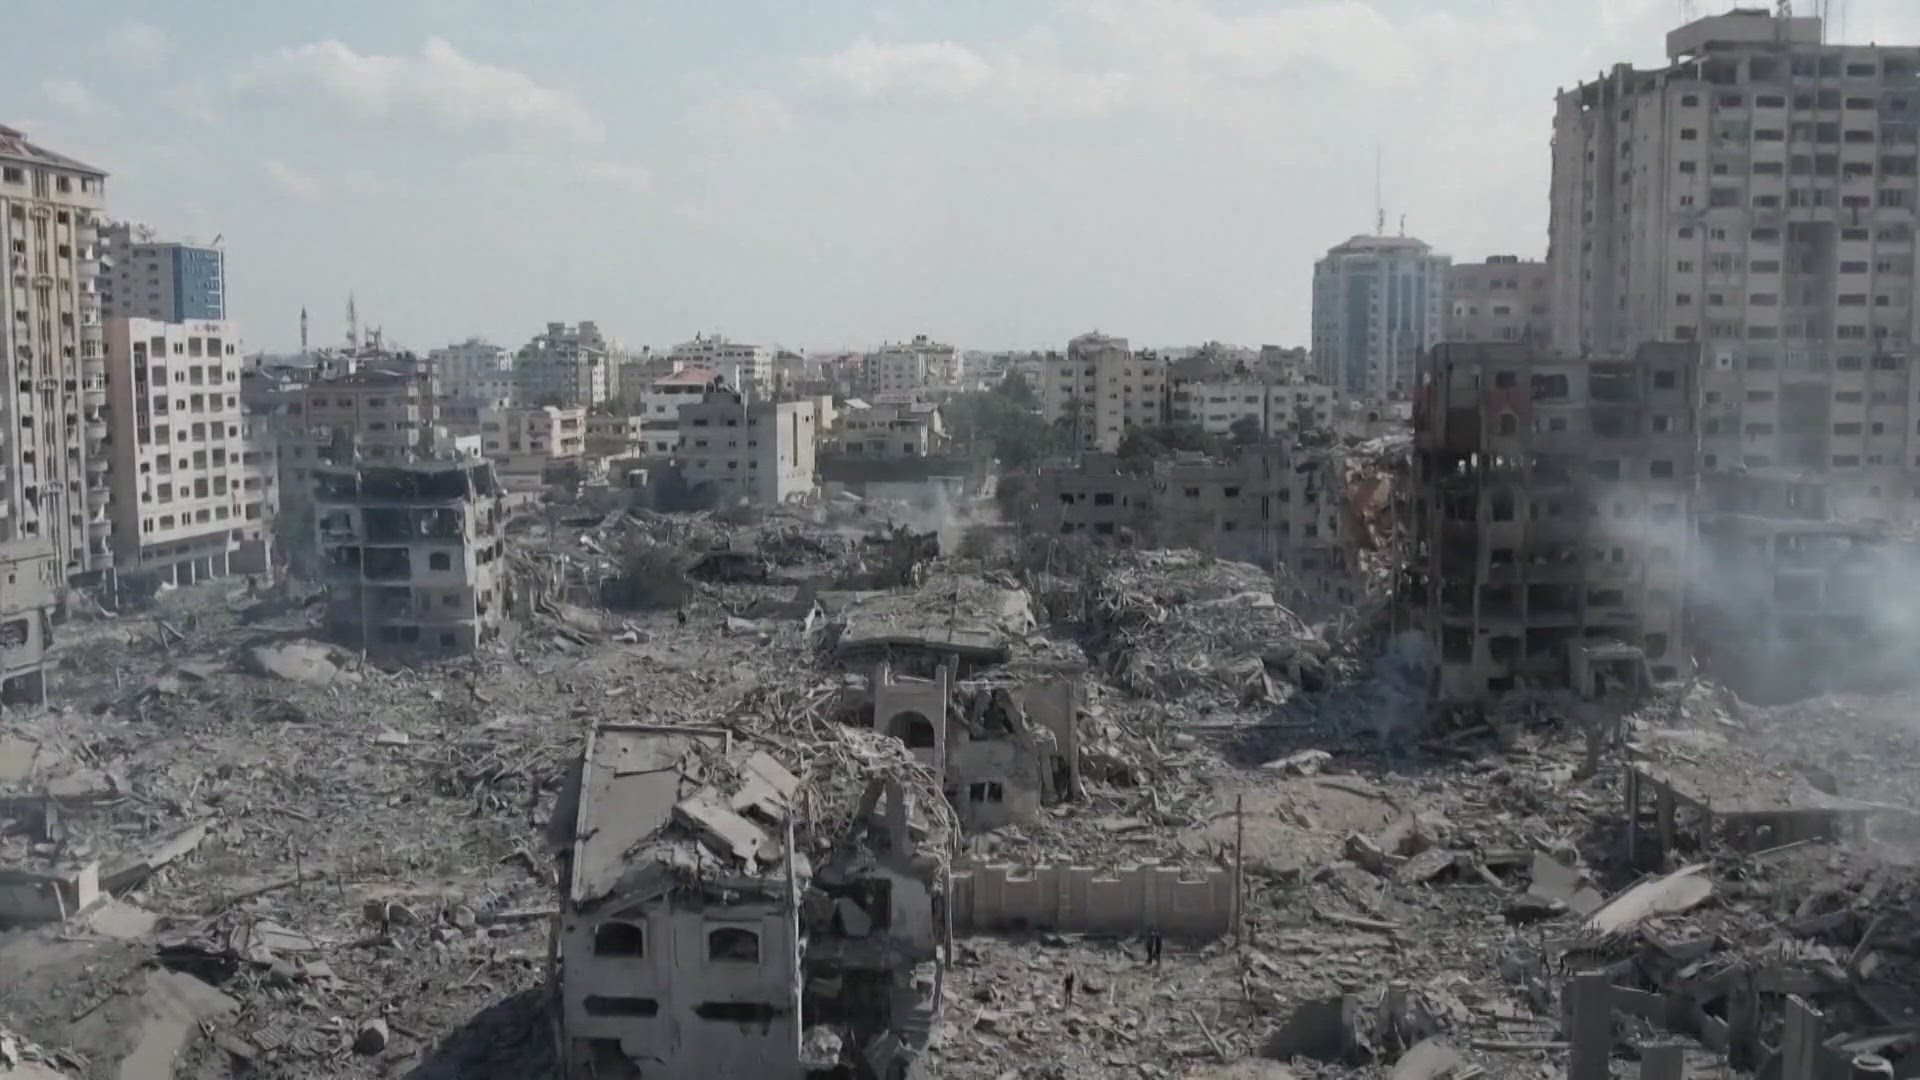 They say if Gaza doesn't get more help soon, people will be at risk for hunger and disease.